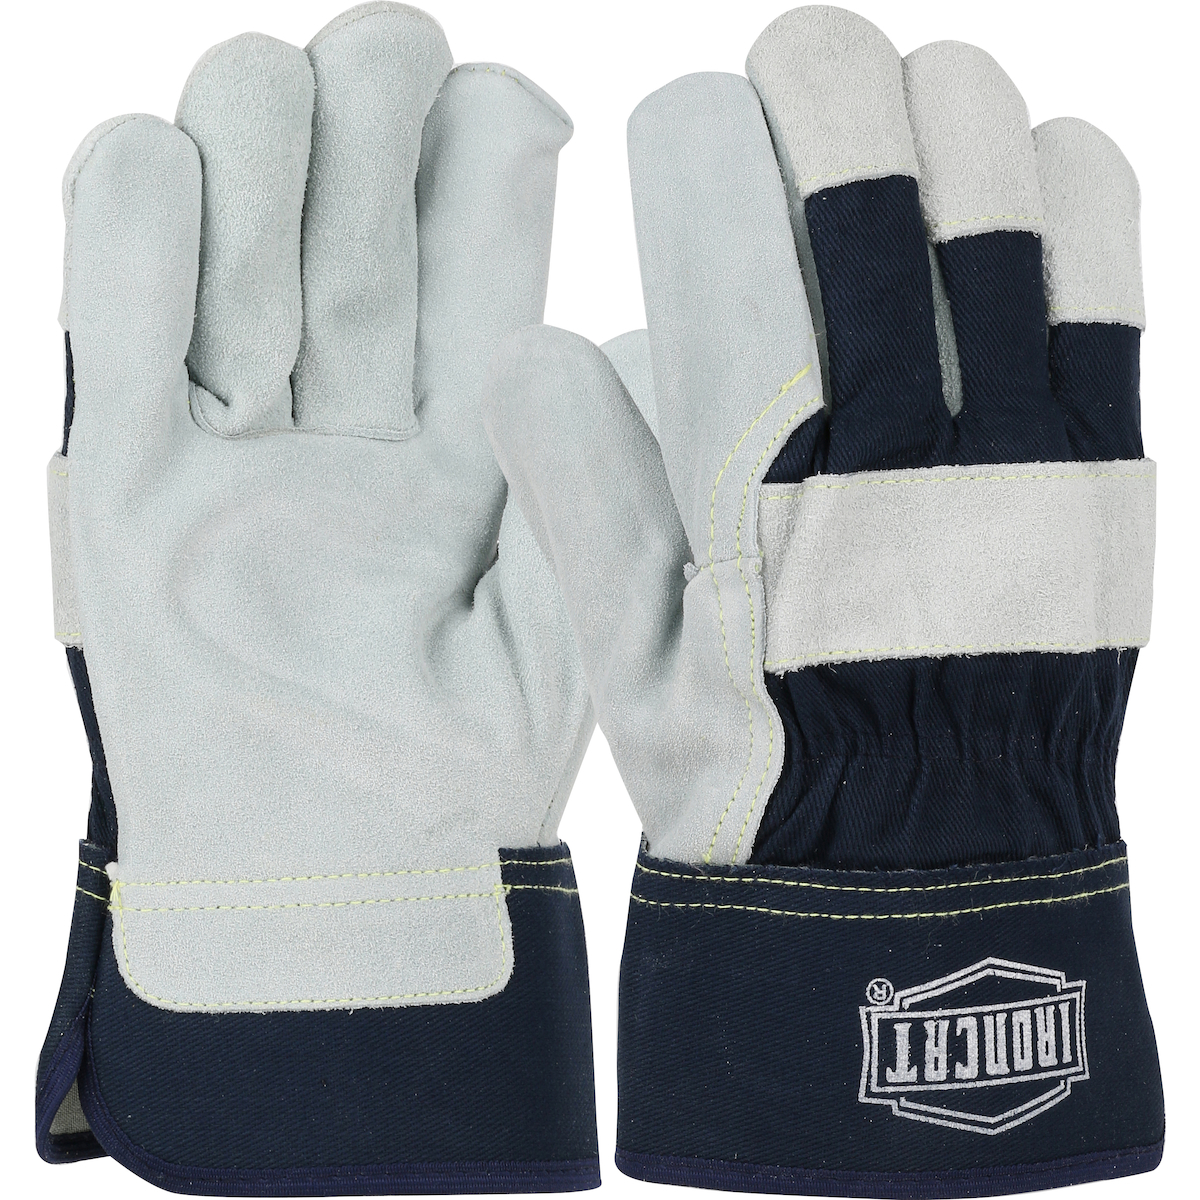 Ironcat® Premium Side Split Cowhide Leather Palm Glove with Canvas Back and Aramid Stitching - Spill Control